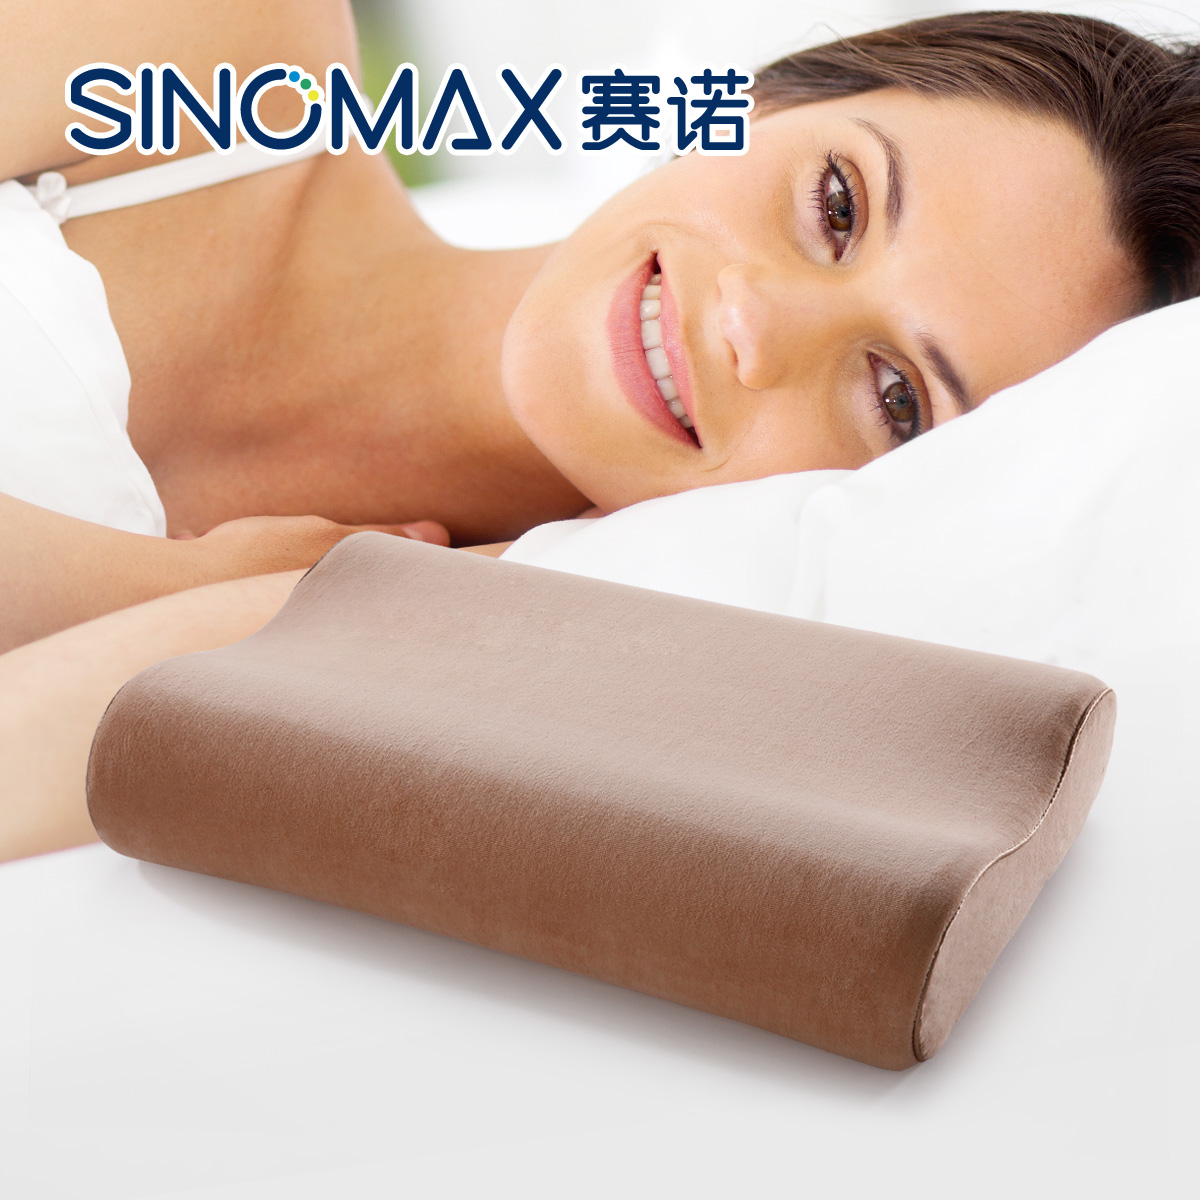 Buy Hong Kong Sinomax Shiner Black Diamond Upgrade Charcoal Memory Pillow Slow Rebound Care Cervical Pillow Neck Pillow In Cheap Price On Alibaba Com